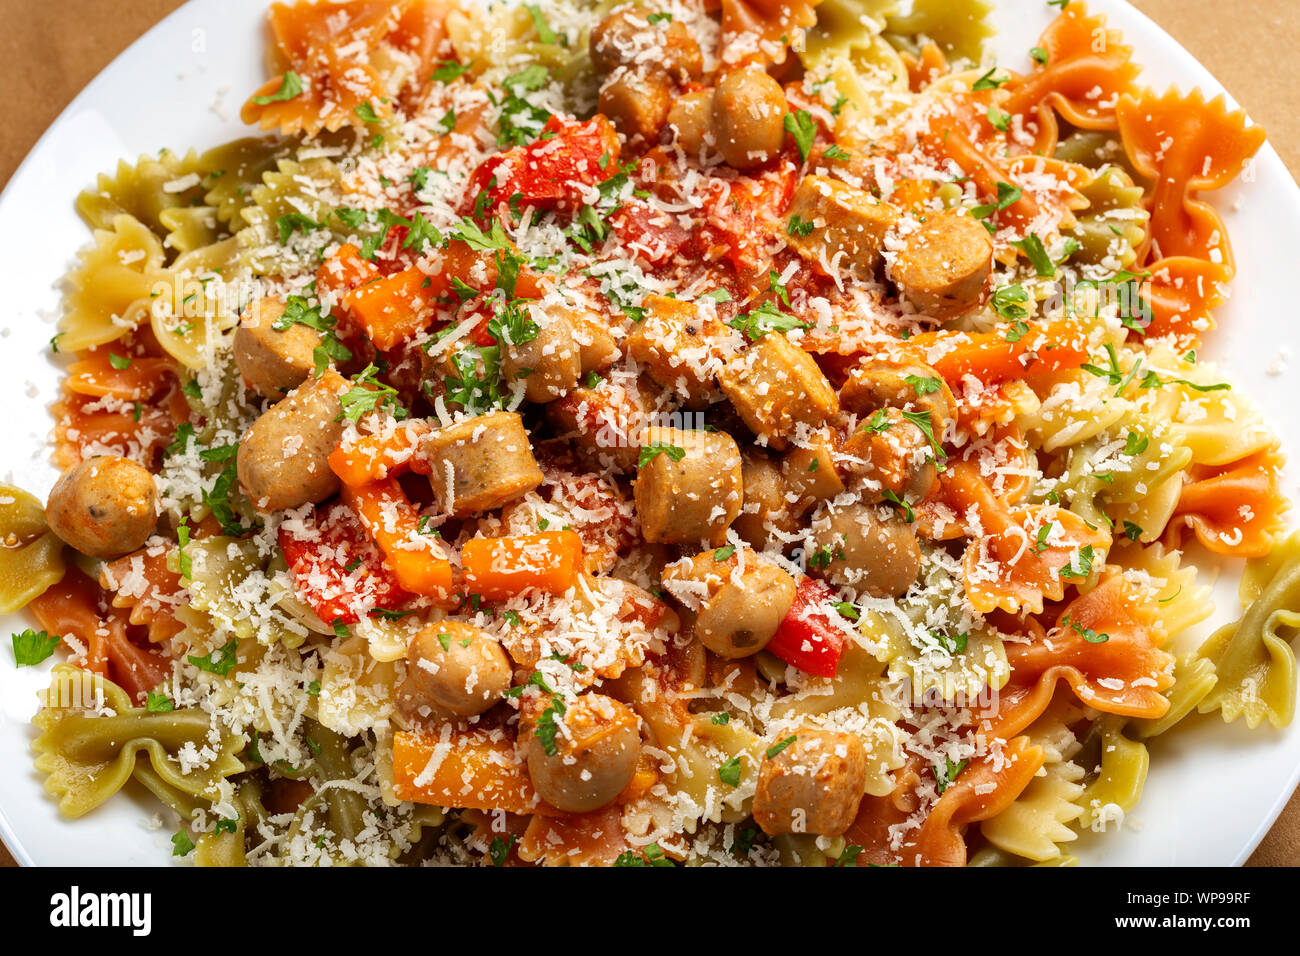 Farfalle pasta with sausages, vegetables and grated parmesan on plate - top view Stock Photo